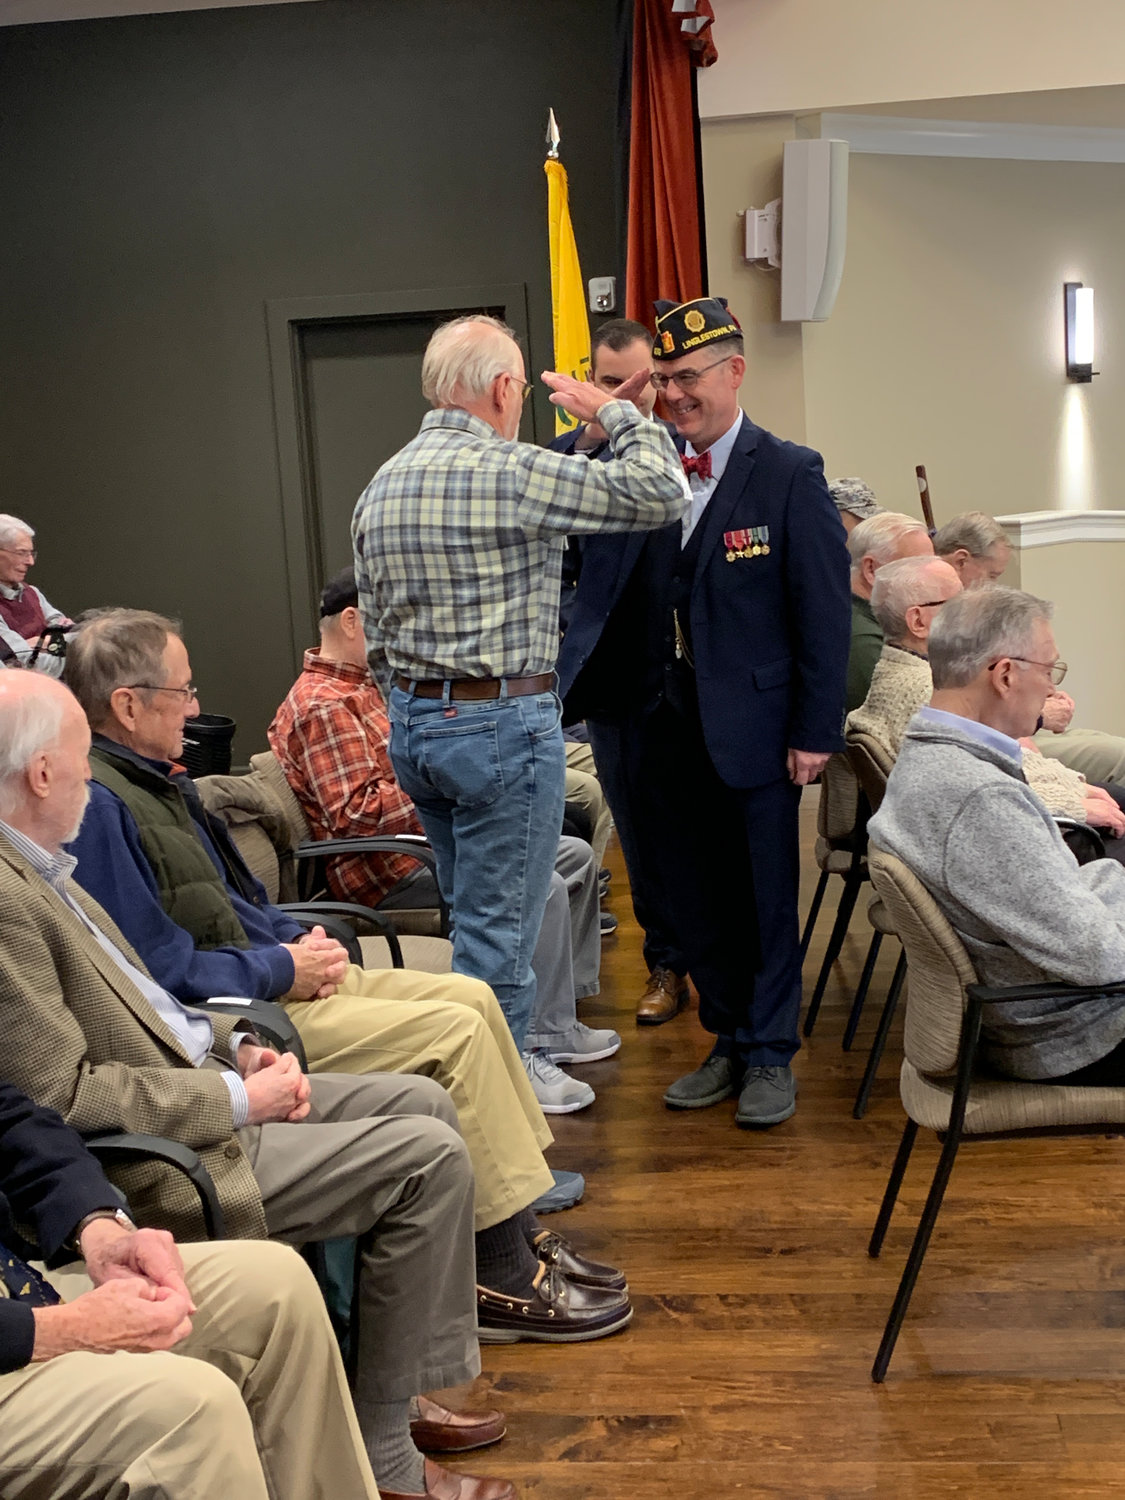 Pine Run recently recognized Vietnam veterans. The veterans were presented with commemorative lapel pins from the office of U.S. Sen. Pat Toomey.